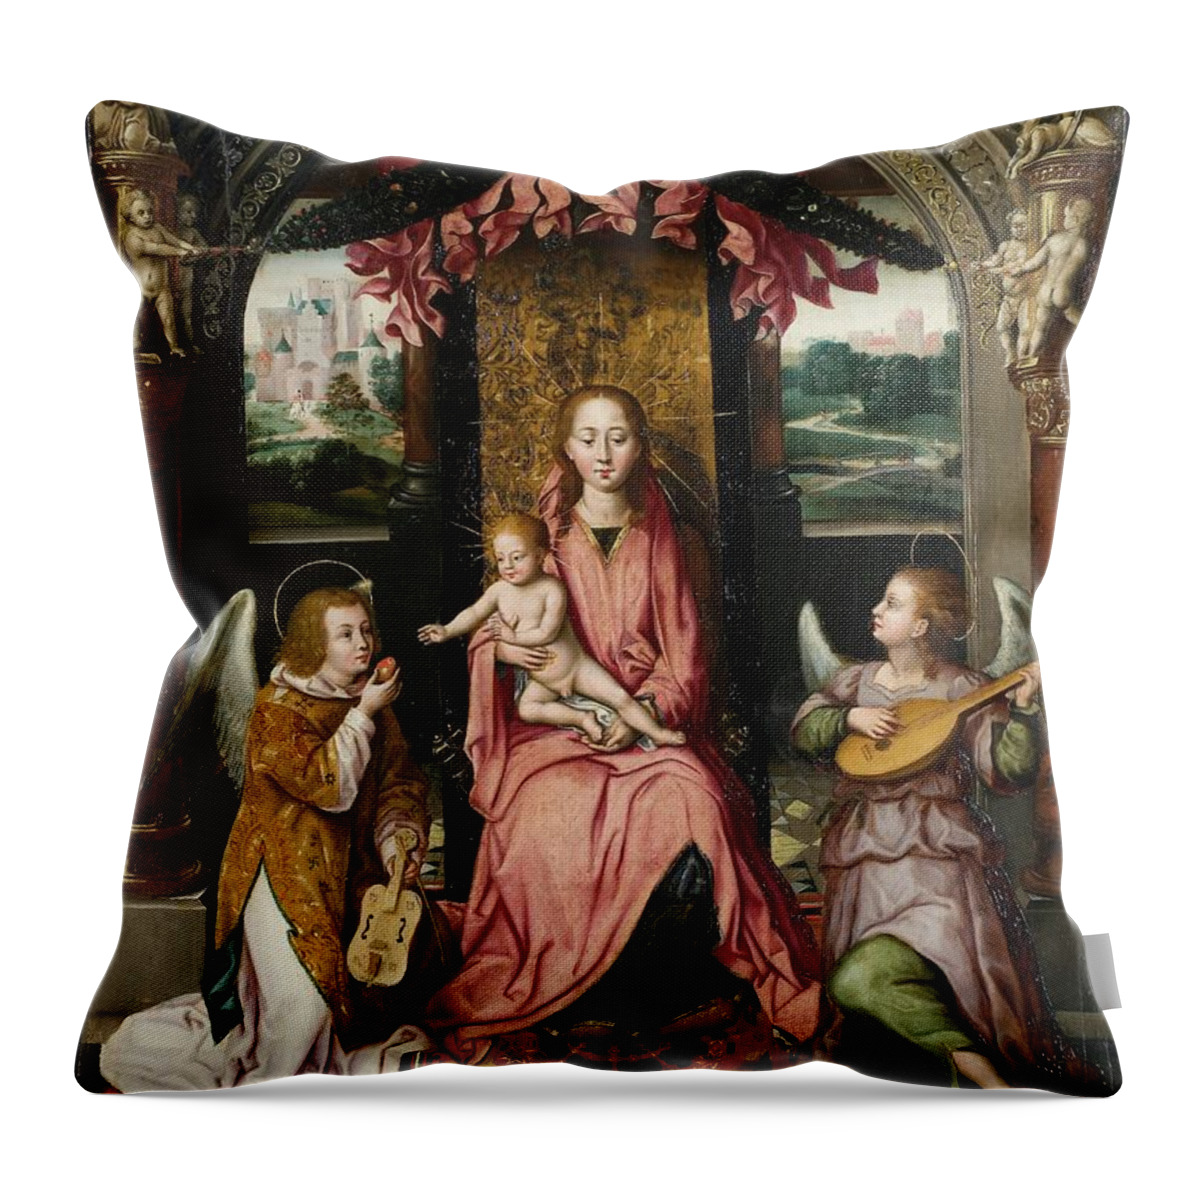 Renaissance Throw Pillow featuring the painting Madonna And Child by Hans Memling